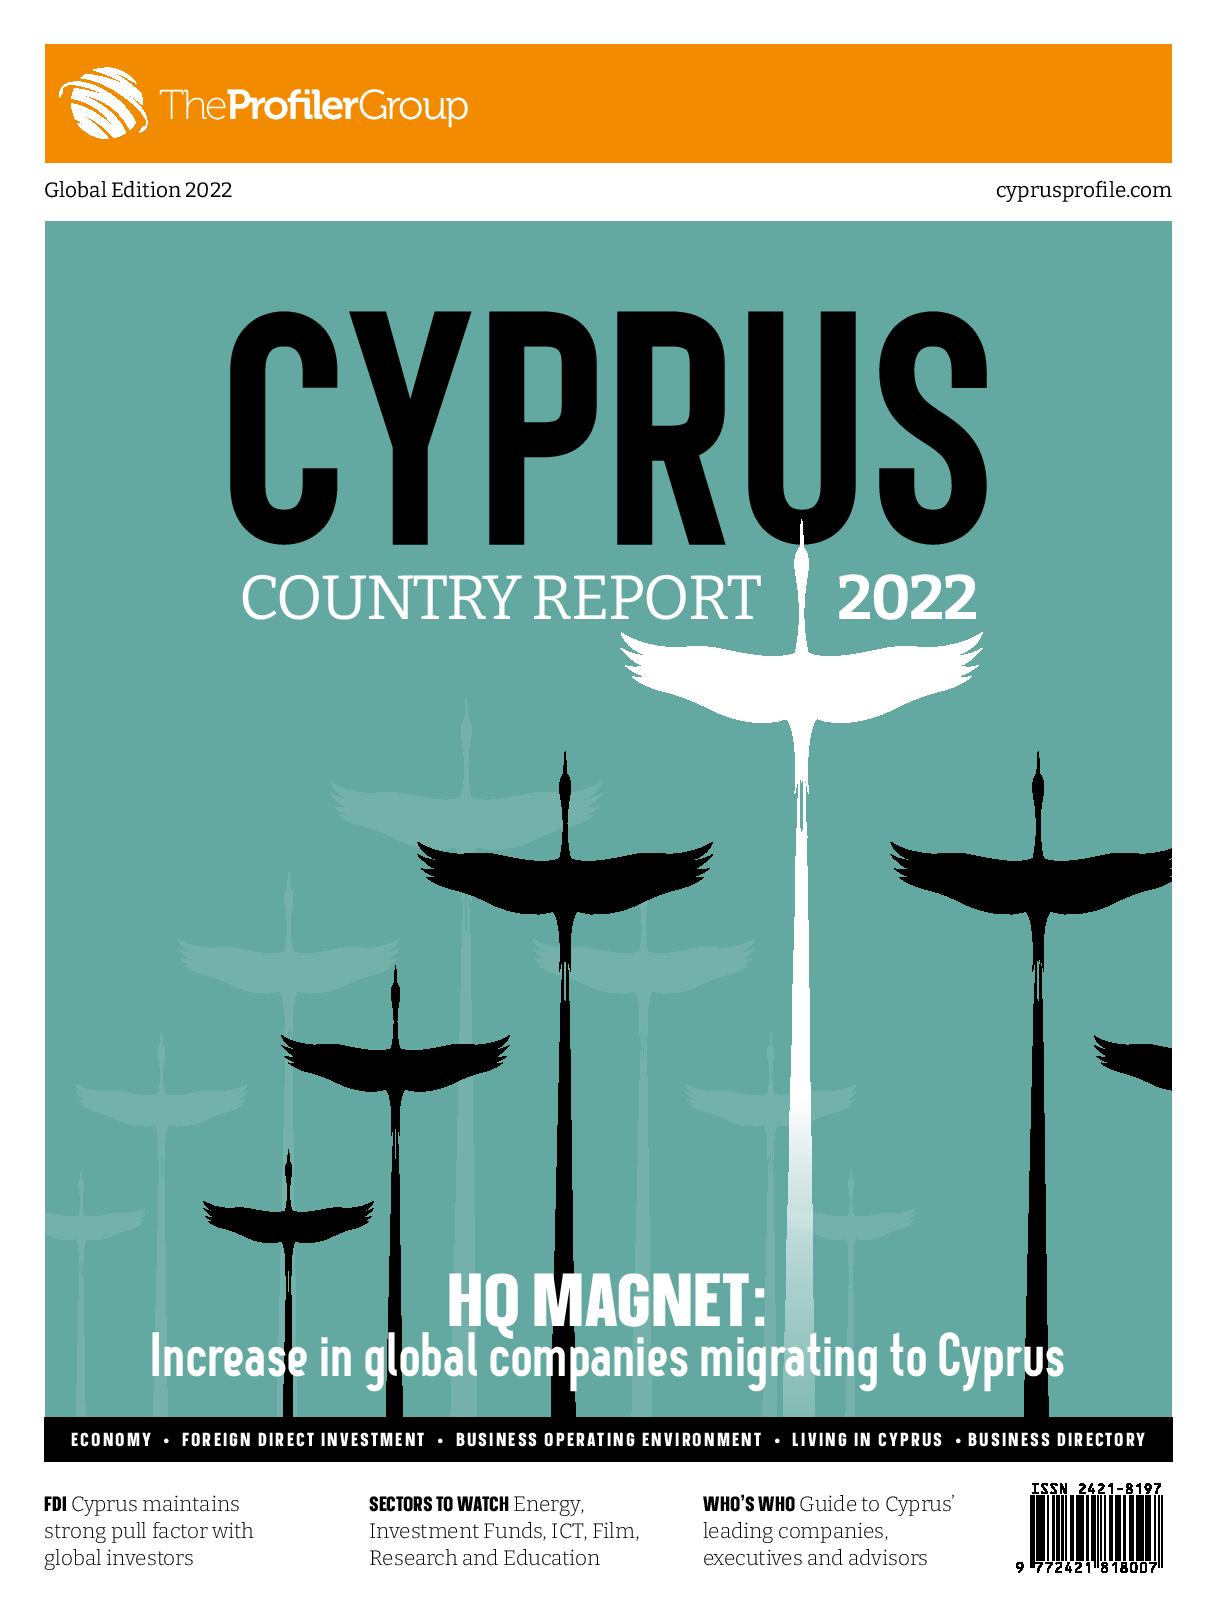 2022 Cyprus Country Report